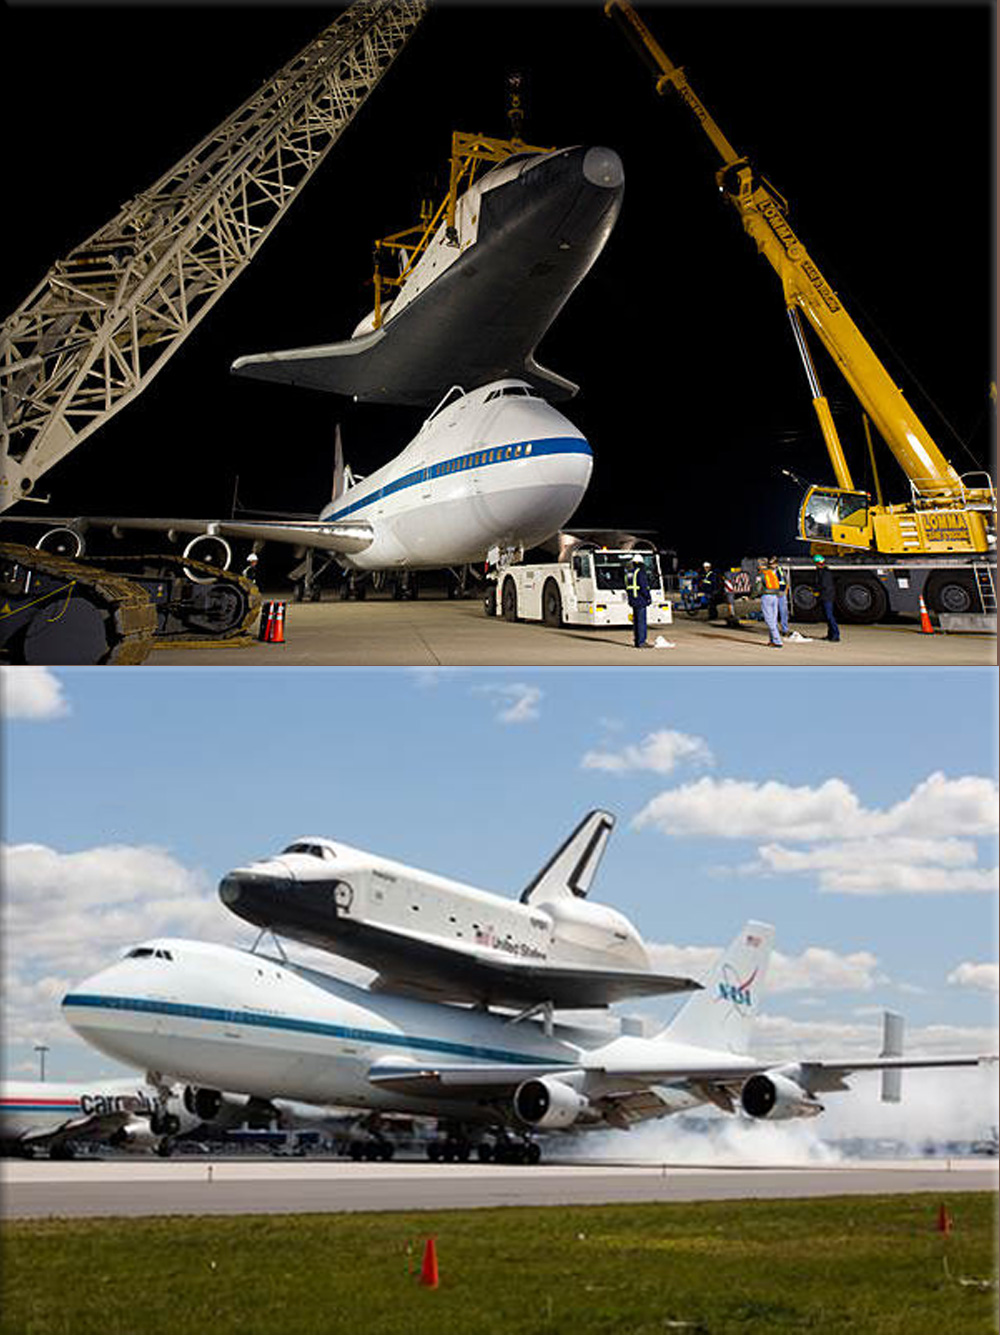 Space Shuttle Enterprise - NASA 747 Shuttle Carrier Aircraft, headed for Intrepid Sea Air and Space Museum in New York